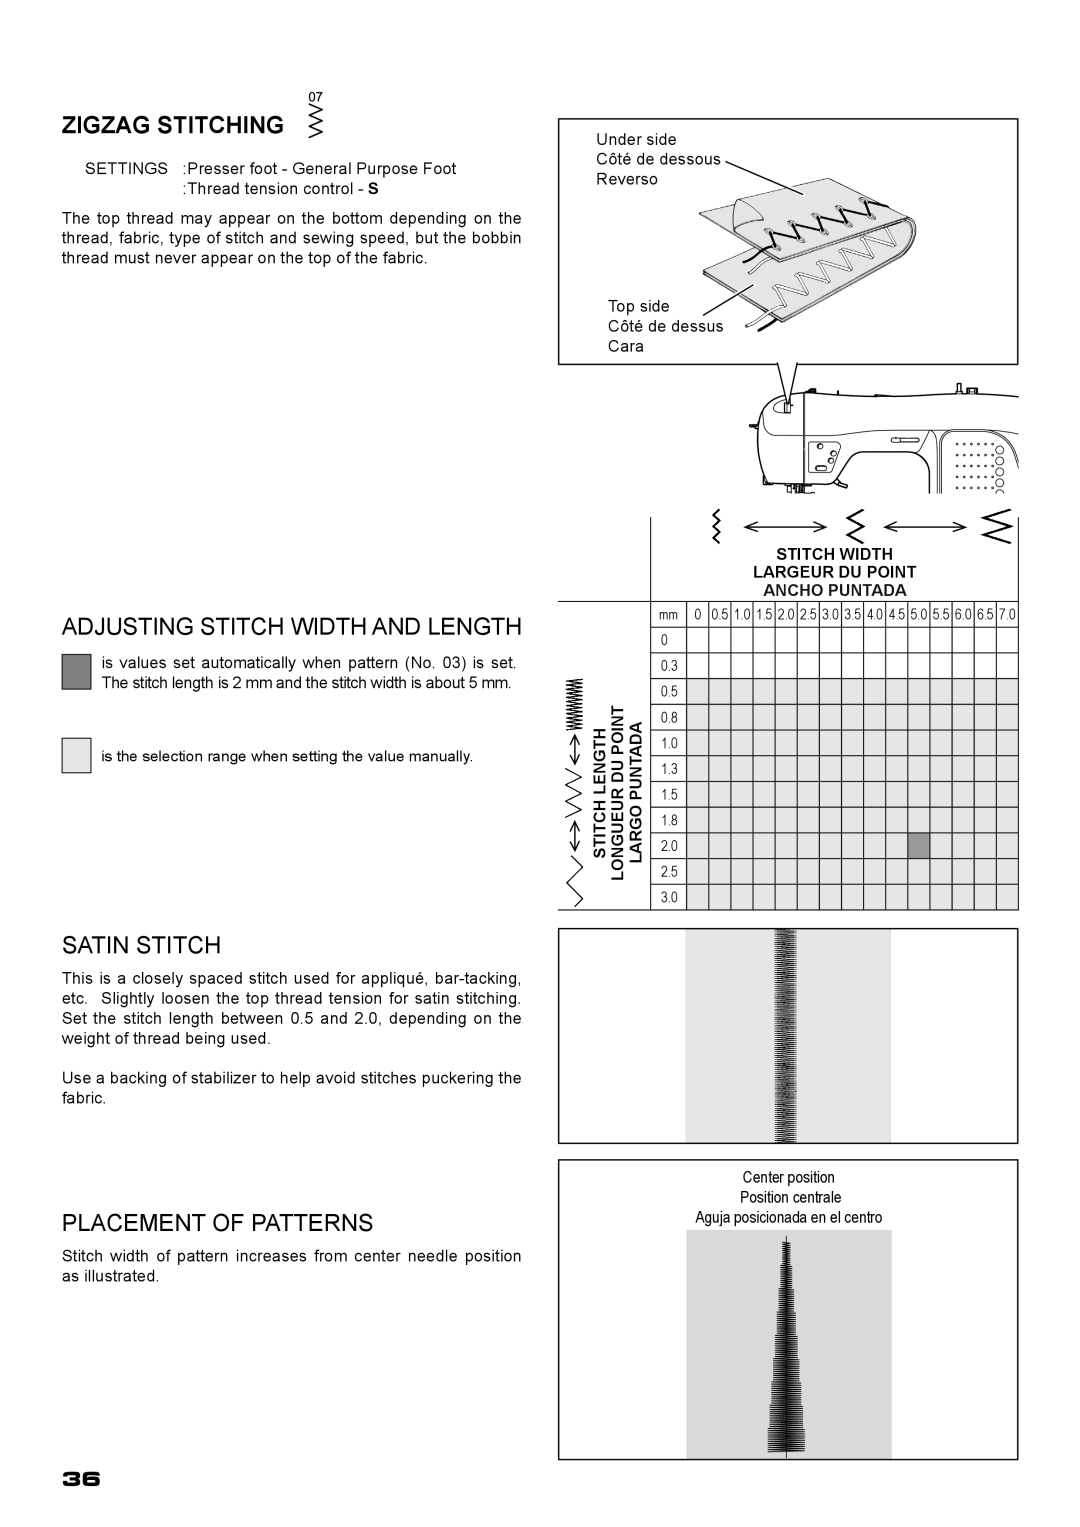 Singer XL-400 instruction manual Zigzag Stitching, Adjusting Stitch Width And Length, Satin Stitch, Placement Of Patterns 